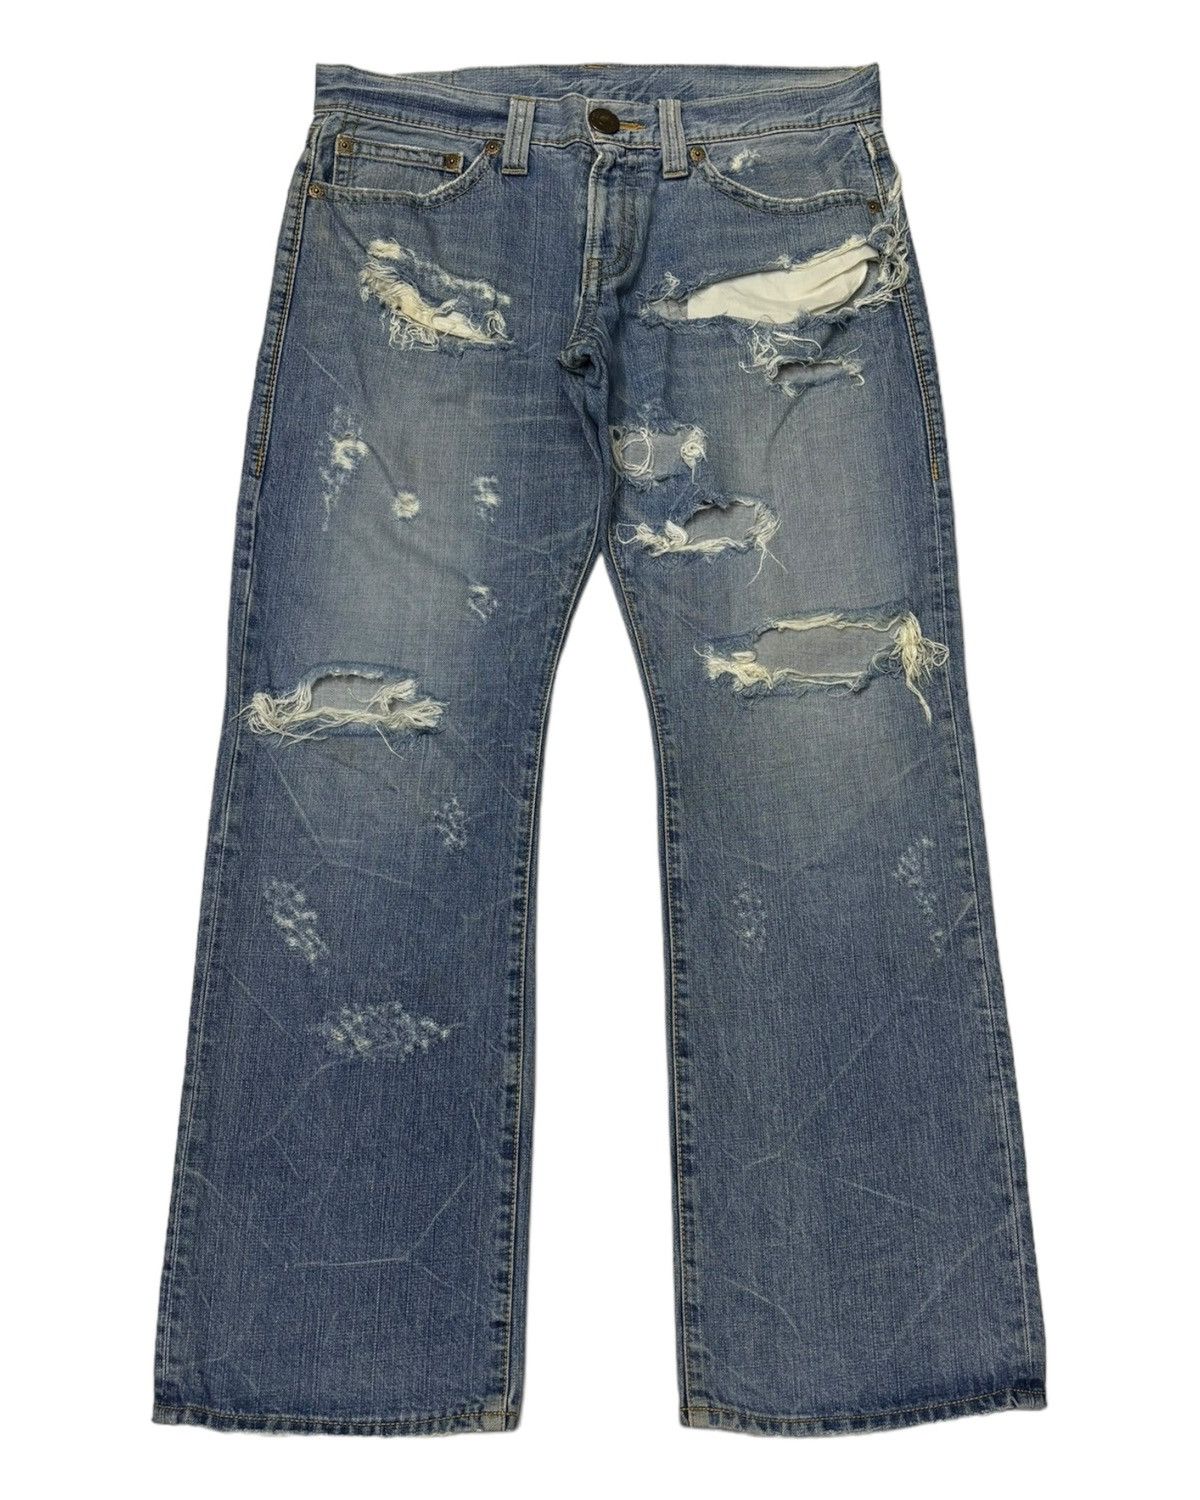 Archival Clothing - VINTAGE CO&LU THRASHED DISTRESS RIPS BAGGY FLARE JEANS - 7